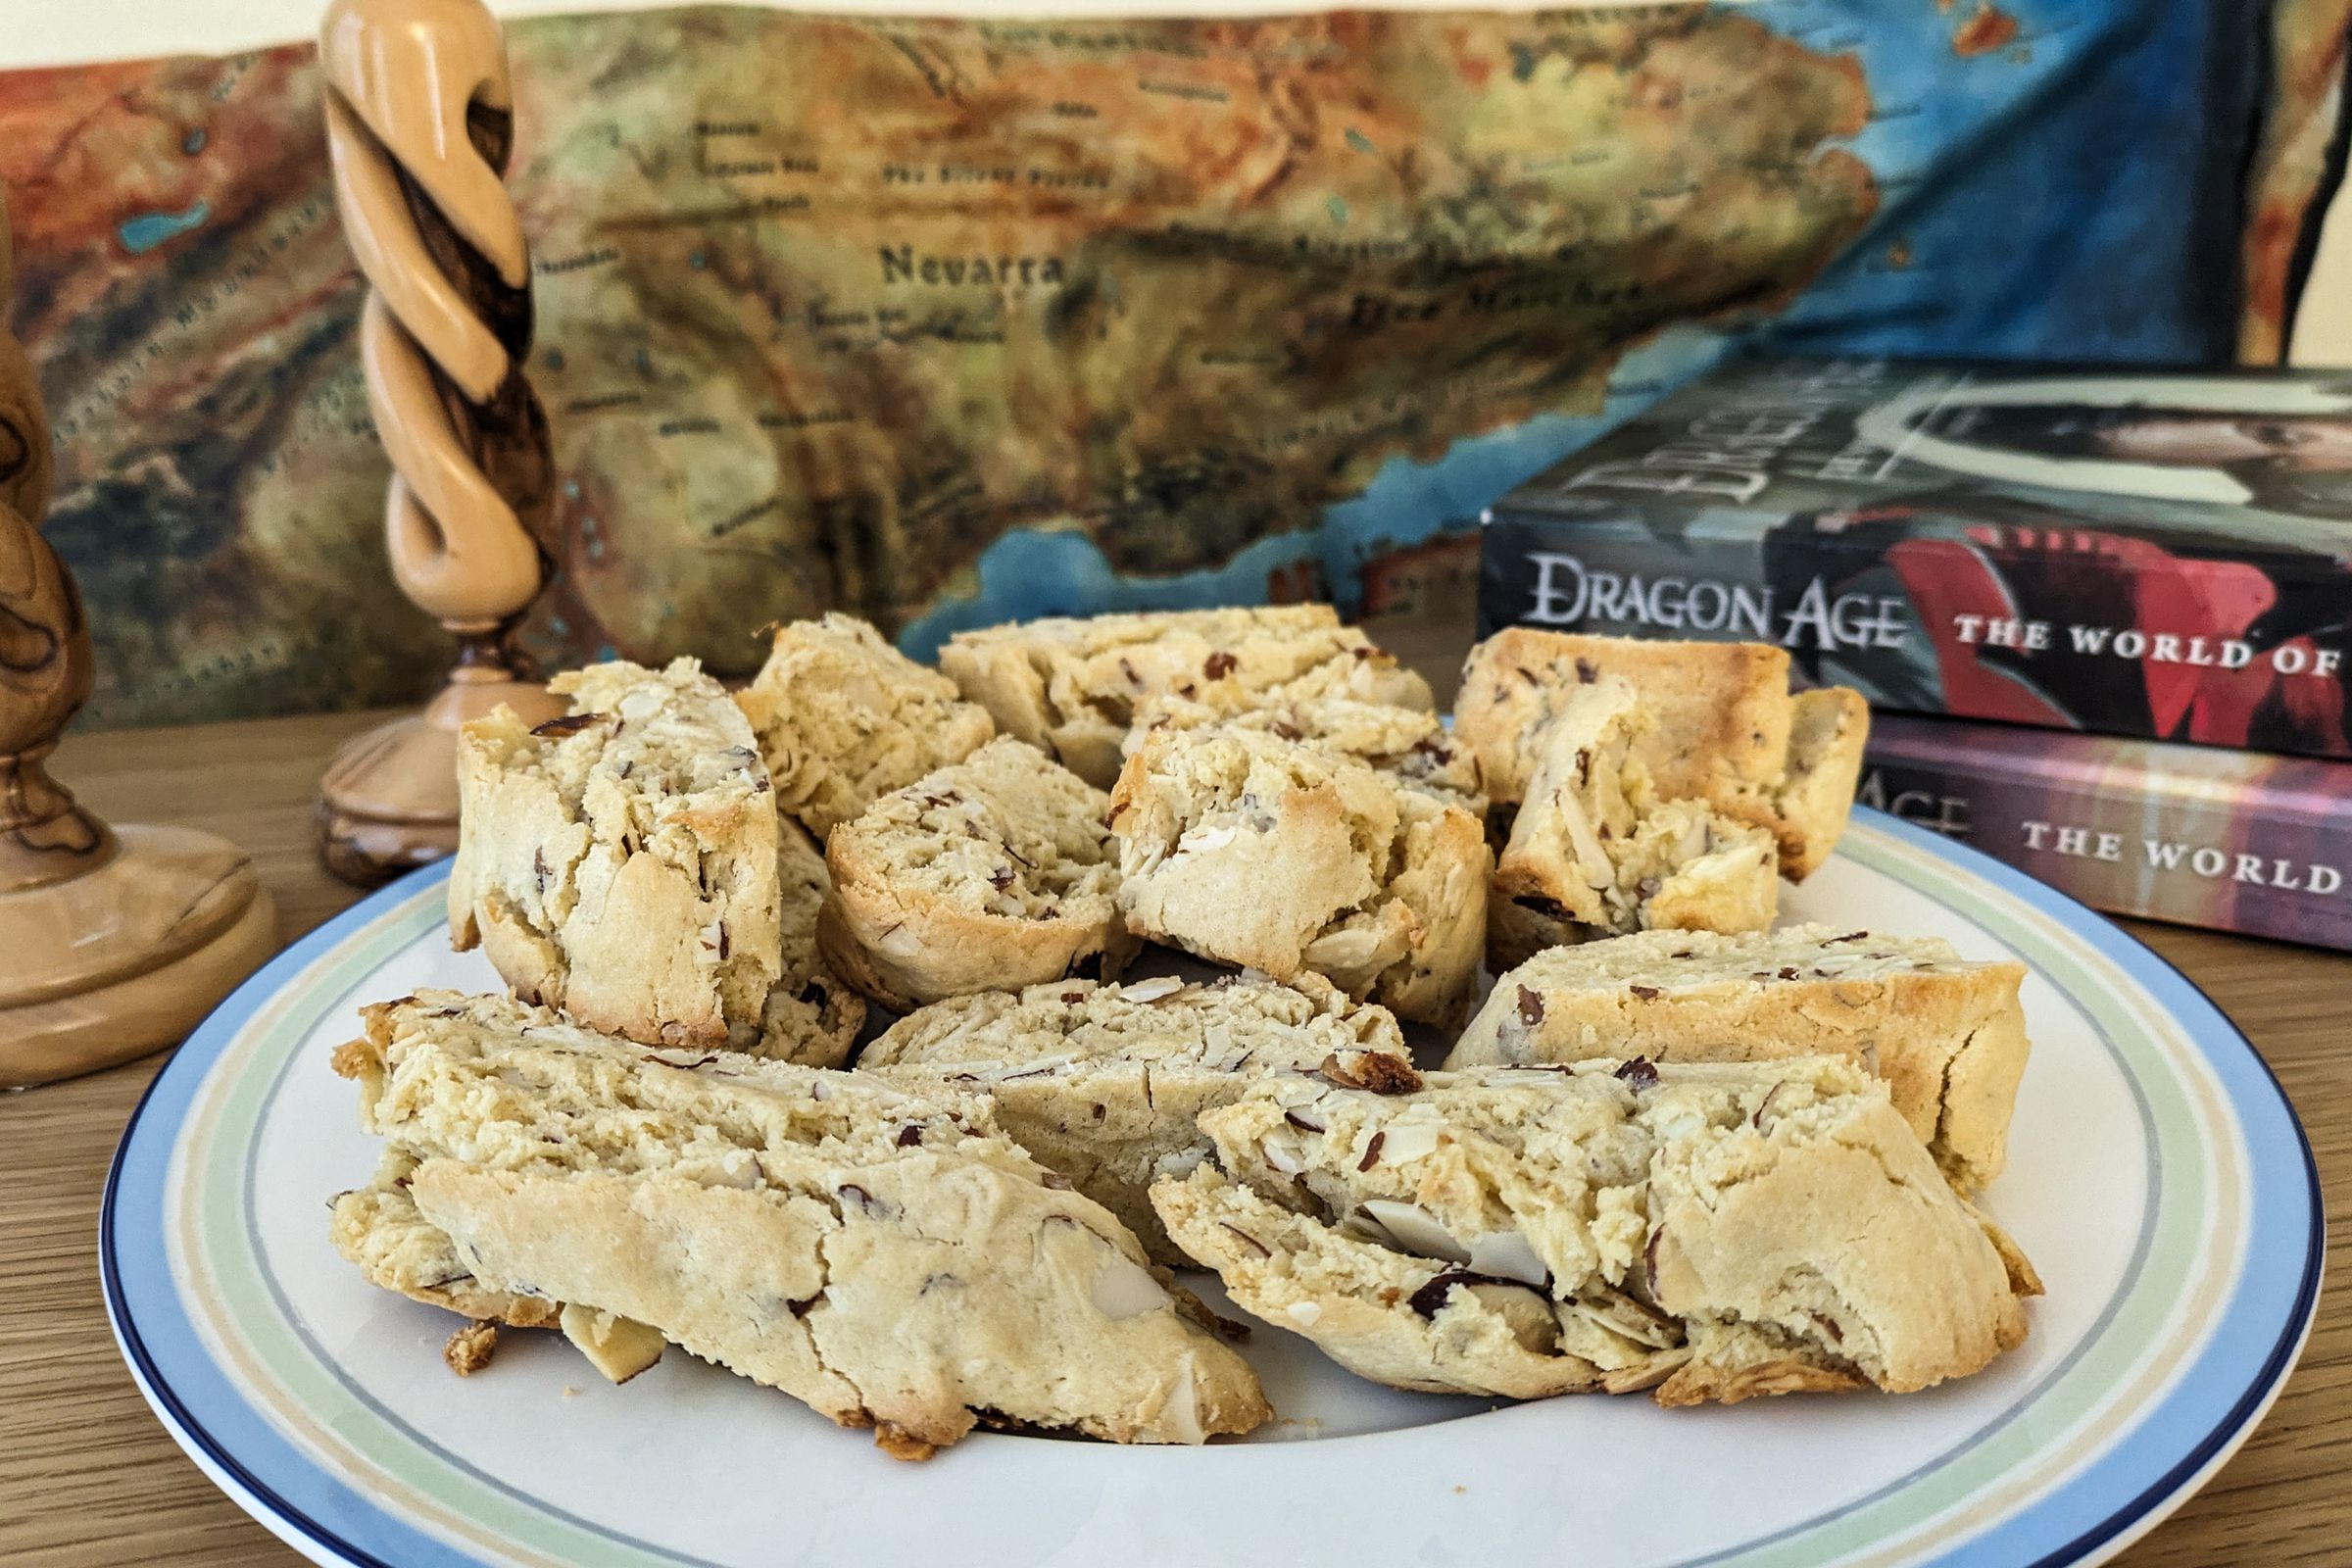 A pile of biscotti-like pastries sitting on a plate in front of a map of Thedas and a pair of wooden candlesticks.